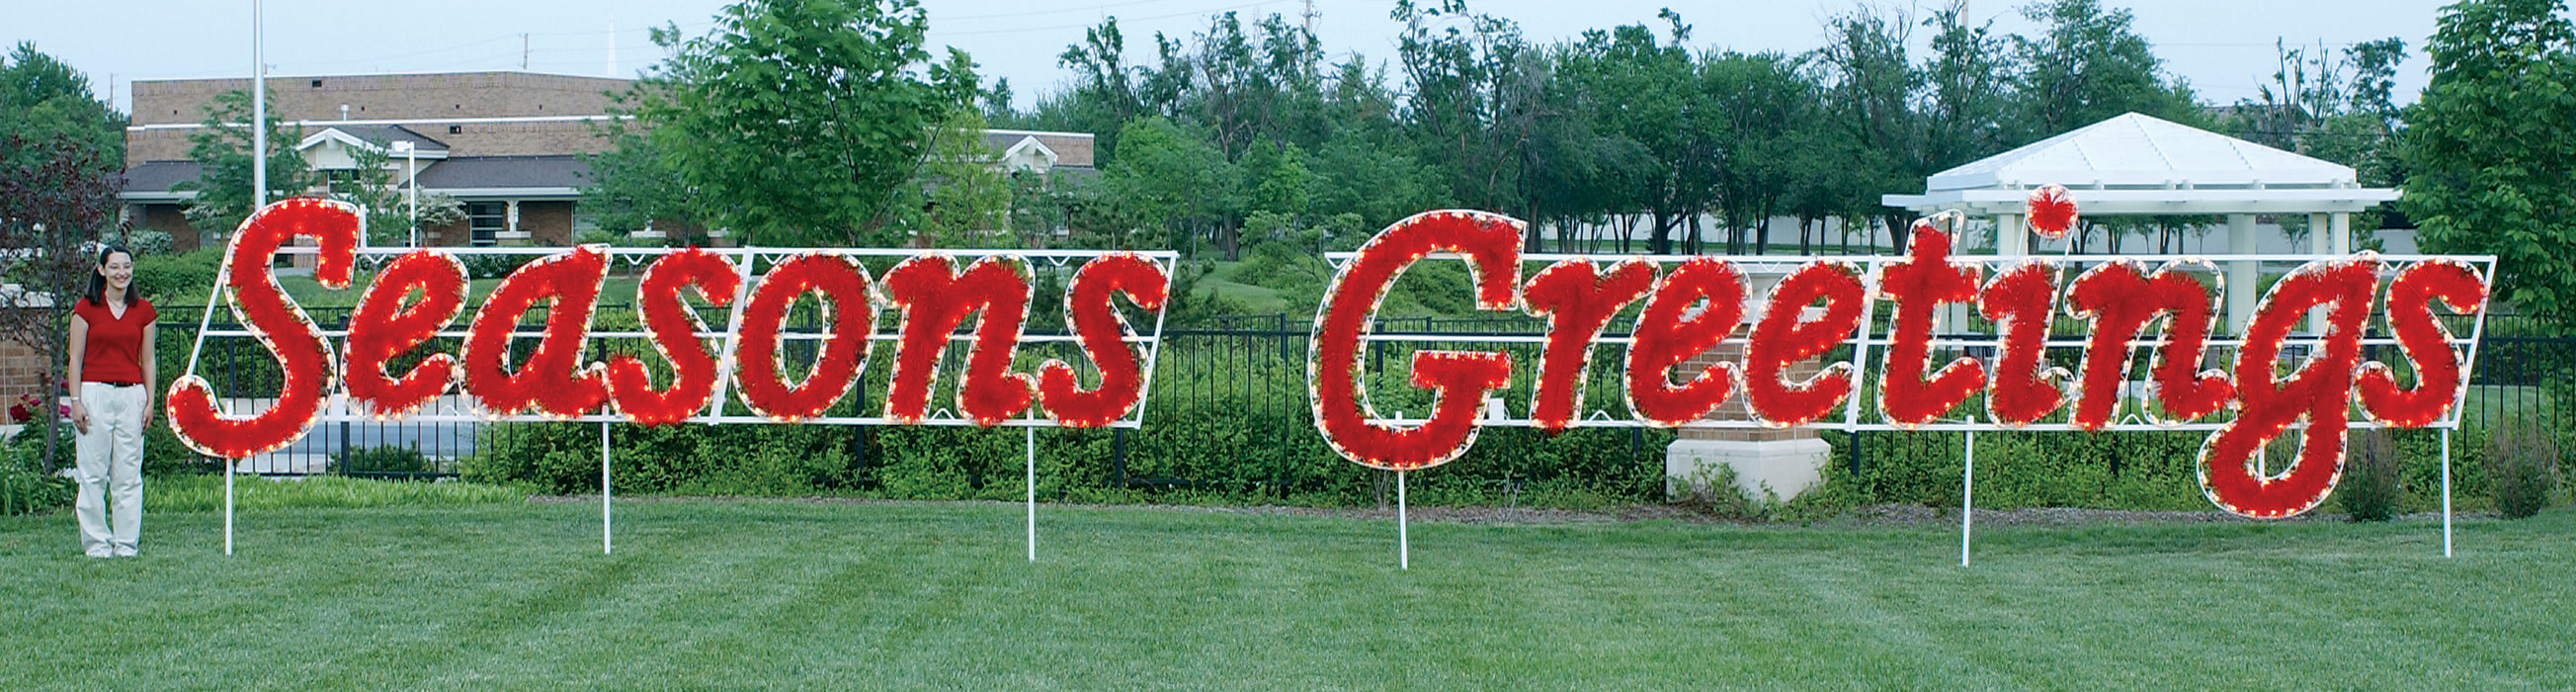 Daytime view, giant Commercial Traditional holiday Christmas Outdoor decorations, Seasons Greetings, Sign, C7 LED, Aluminum Frame, Red, White, 2021